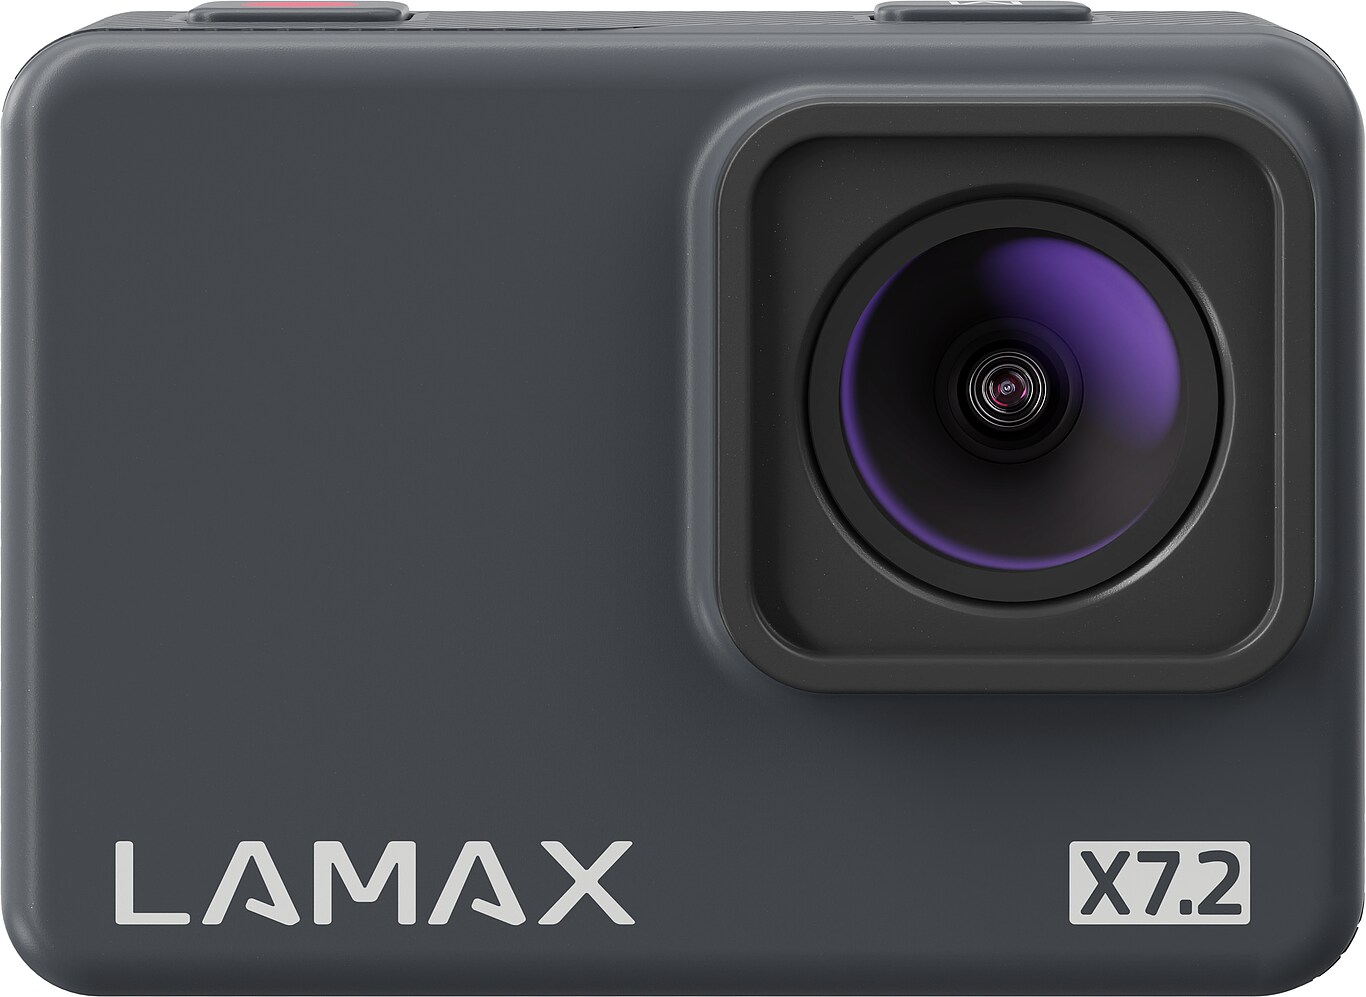 LAMAX X7.2 - Share your world in 4K